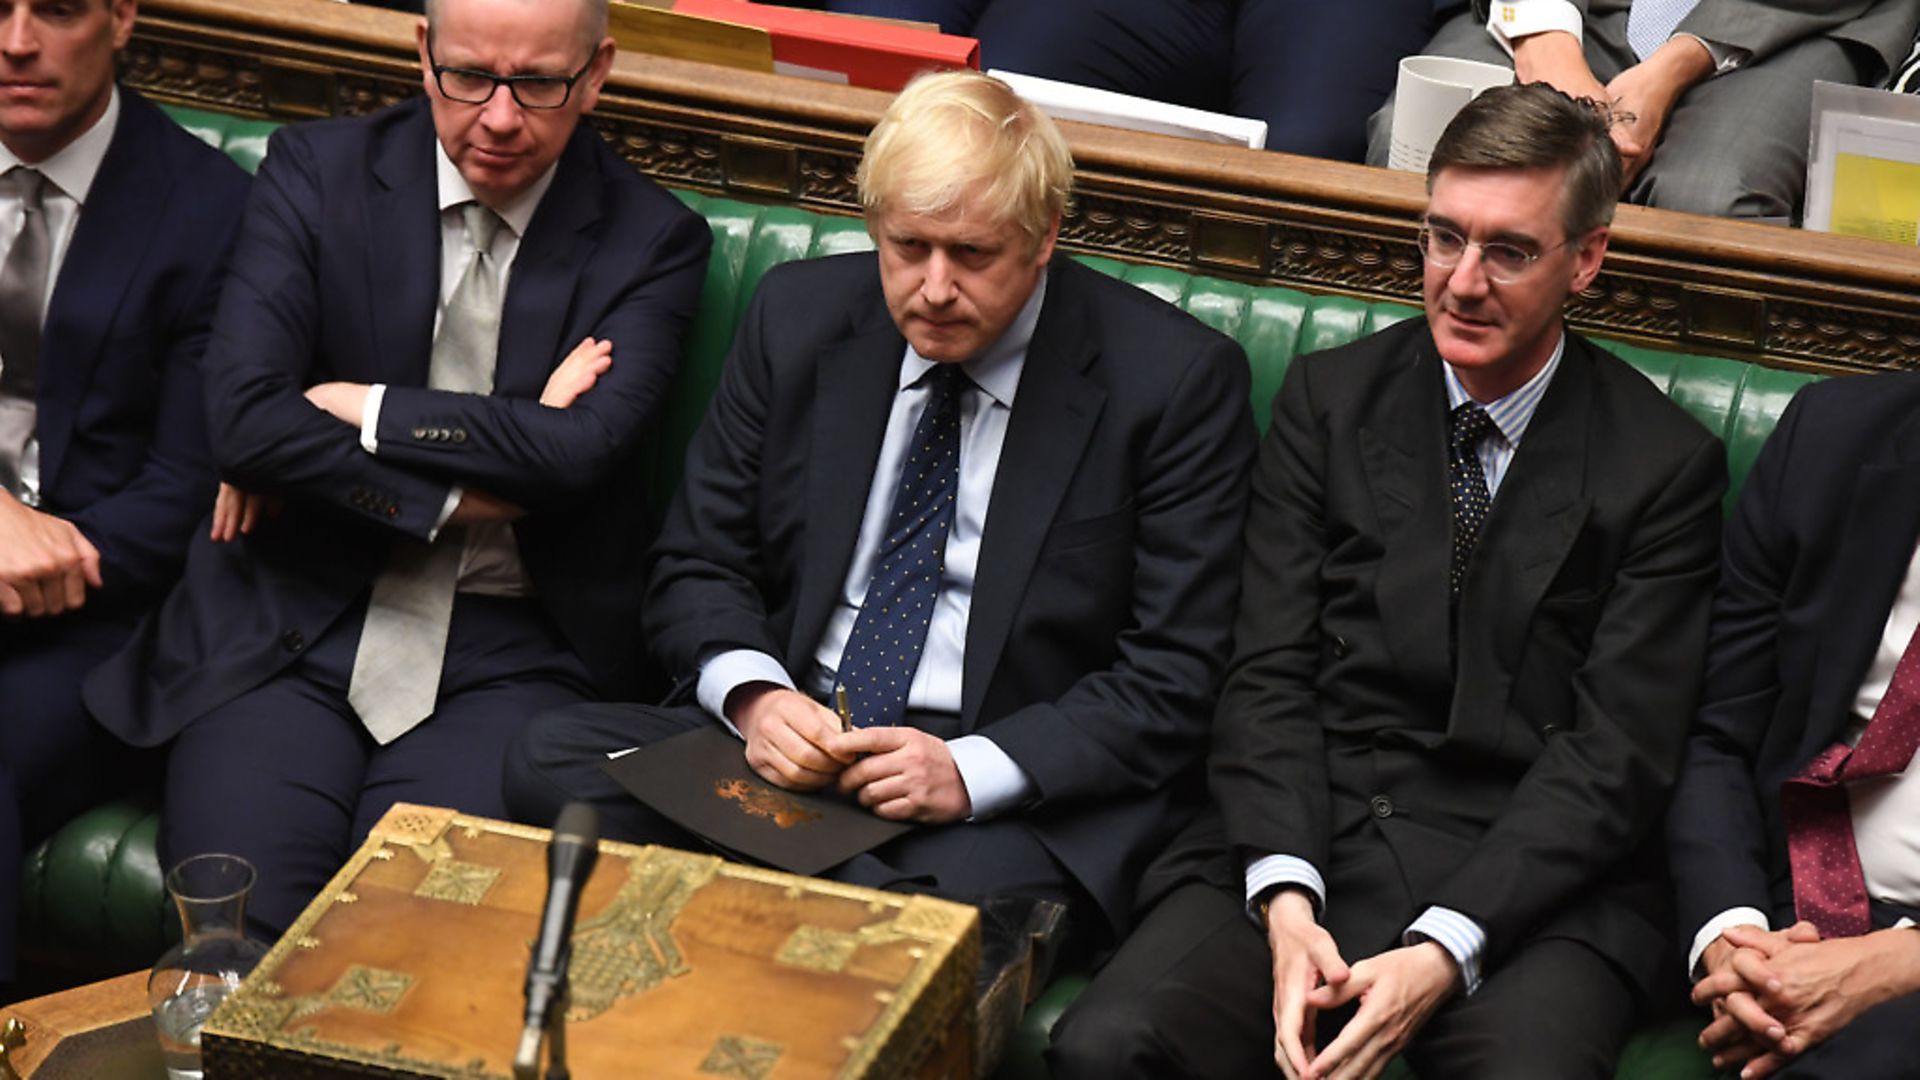 Boris Johnson (centre) in the House of Commons with Michael Gove and Jacob Rees-Mogg. Photograph: Jessica Taylor/UK Parliament/PA Wire. - Credit: PA